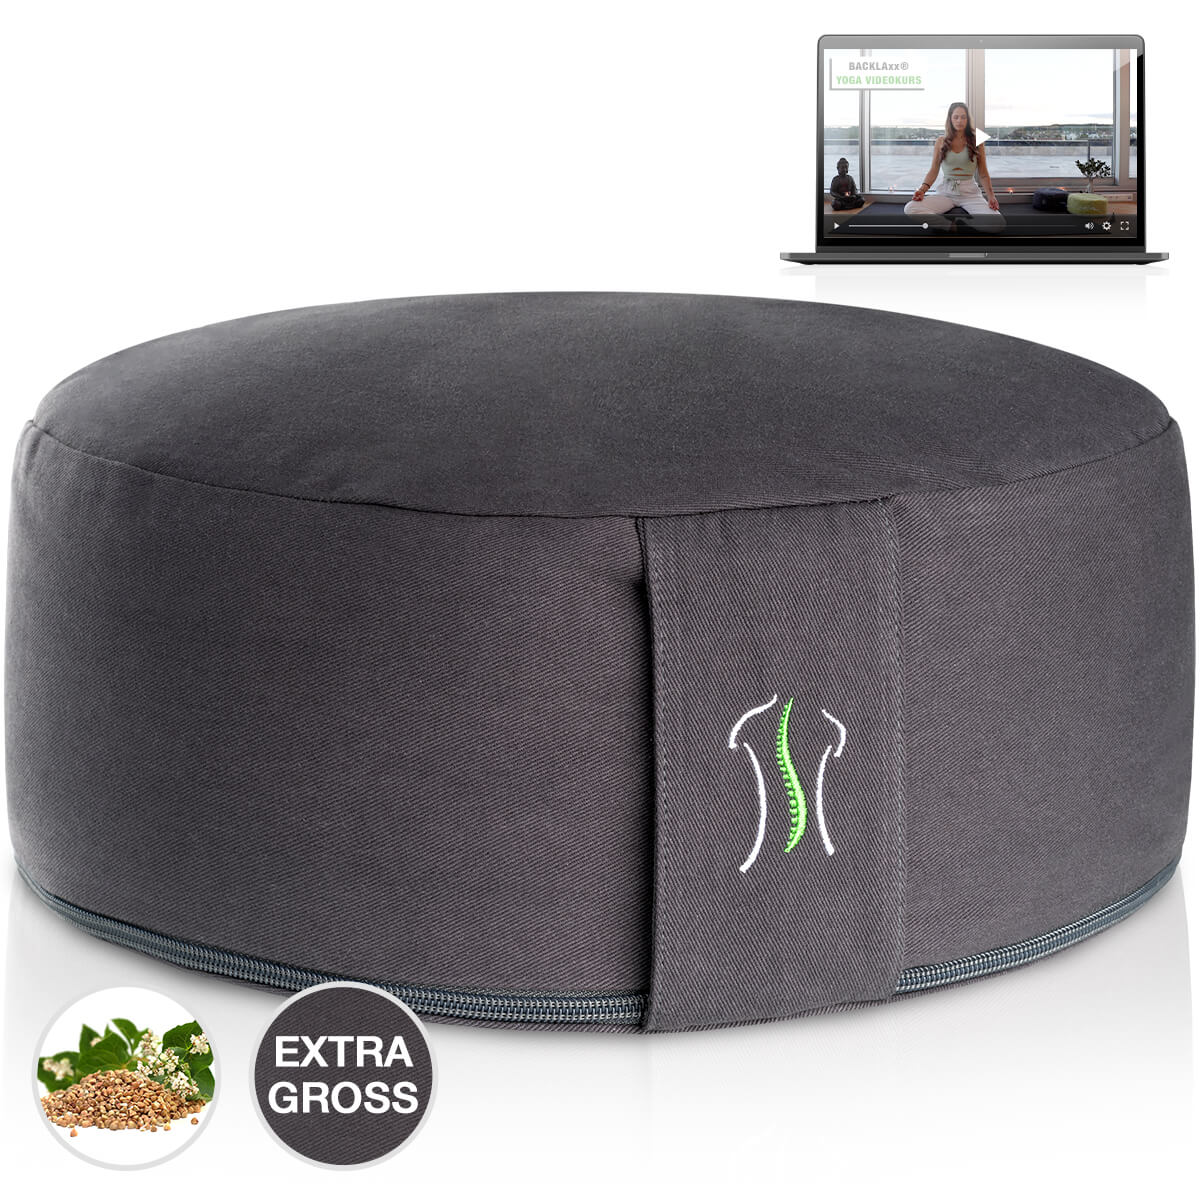 Meditation cushion (incl. free video course)